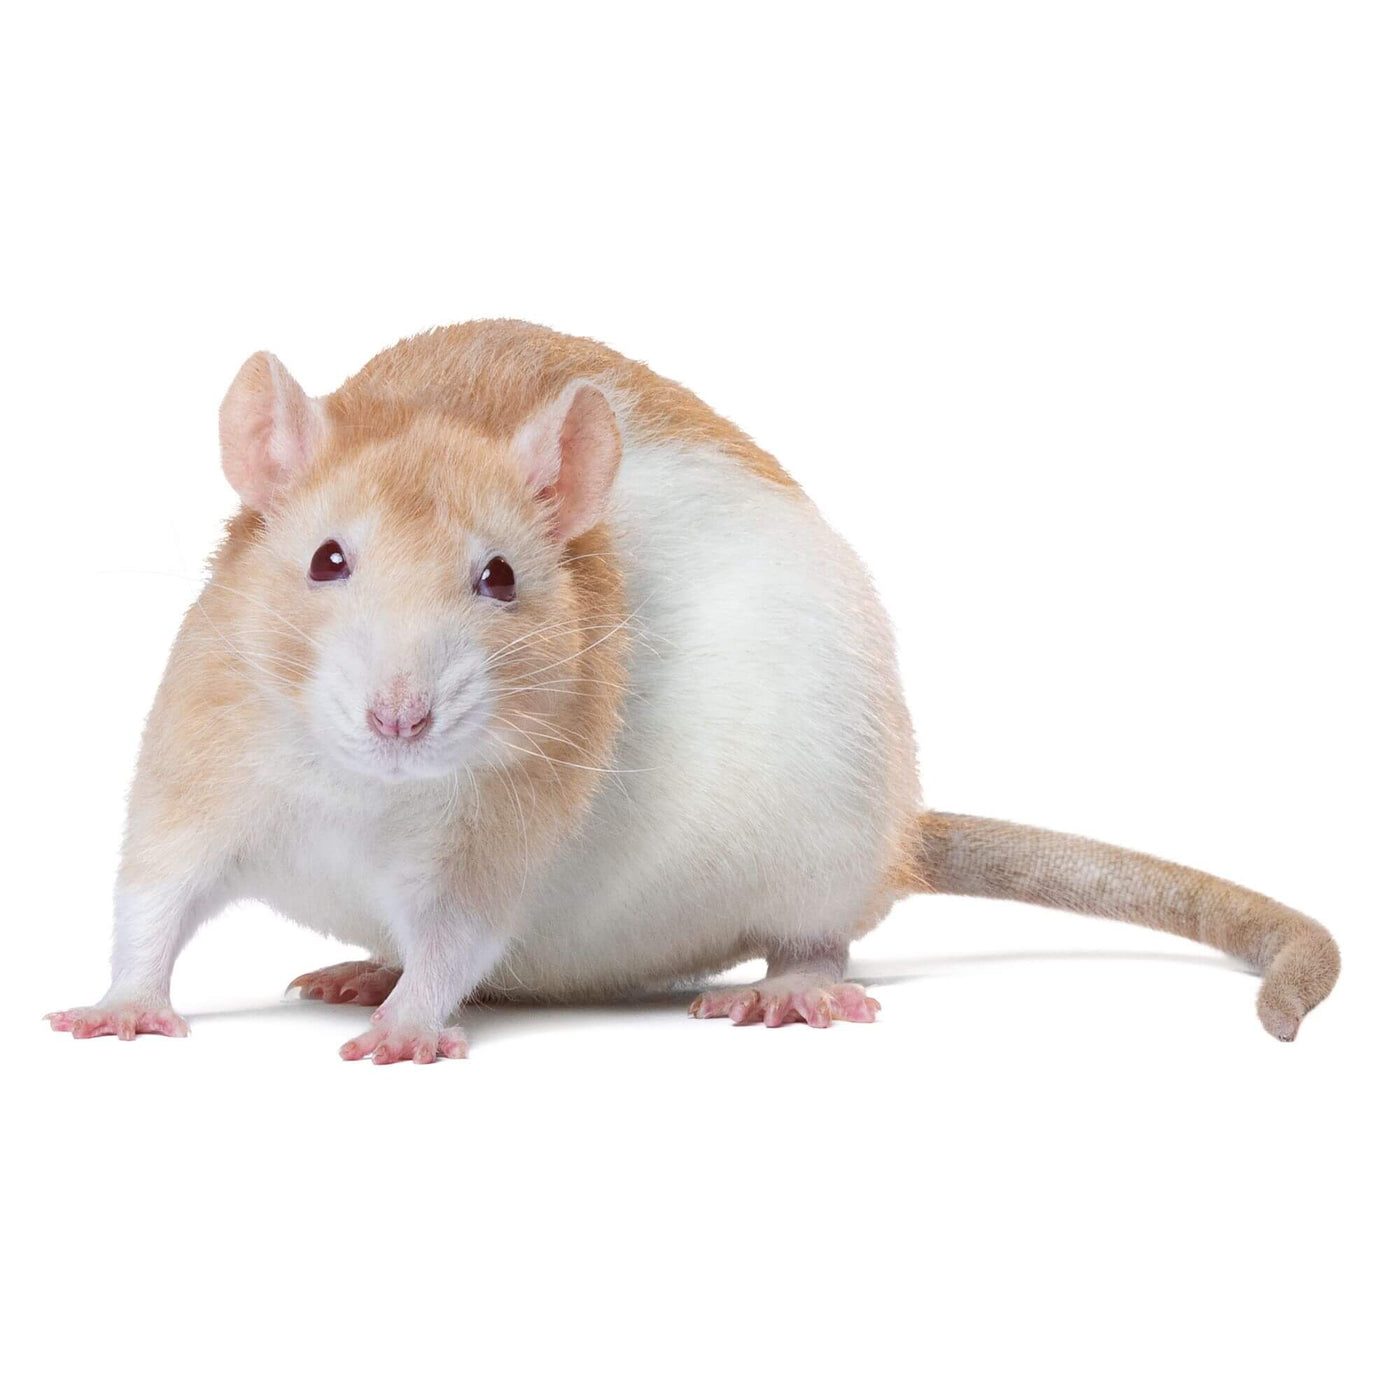 buy frozen rodents online at cheap prices near you, rats for sale